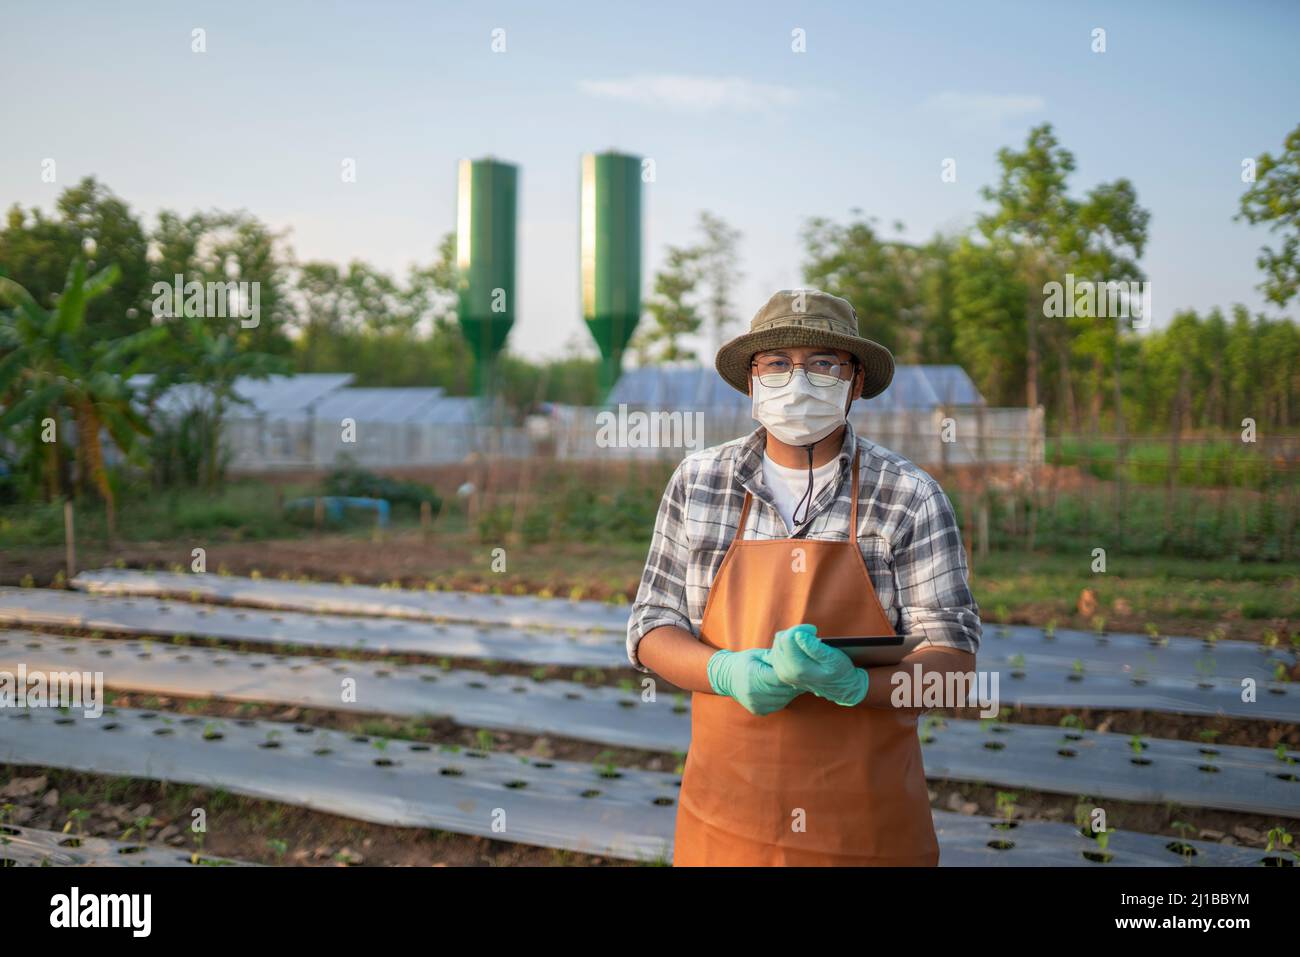 portrait young smart farm used solar panel growth water or renewable energy Stock Photo